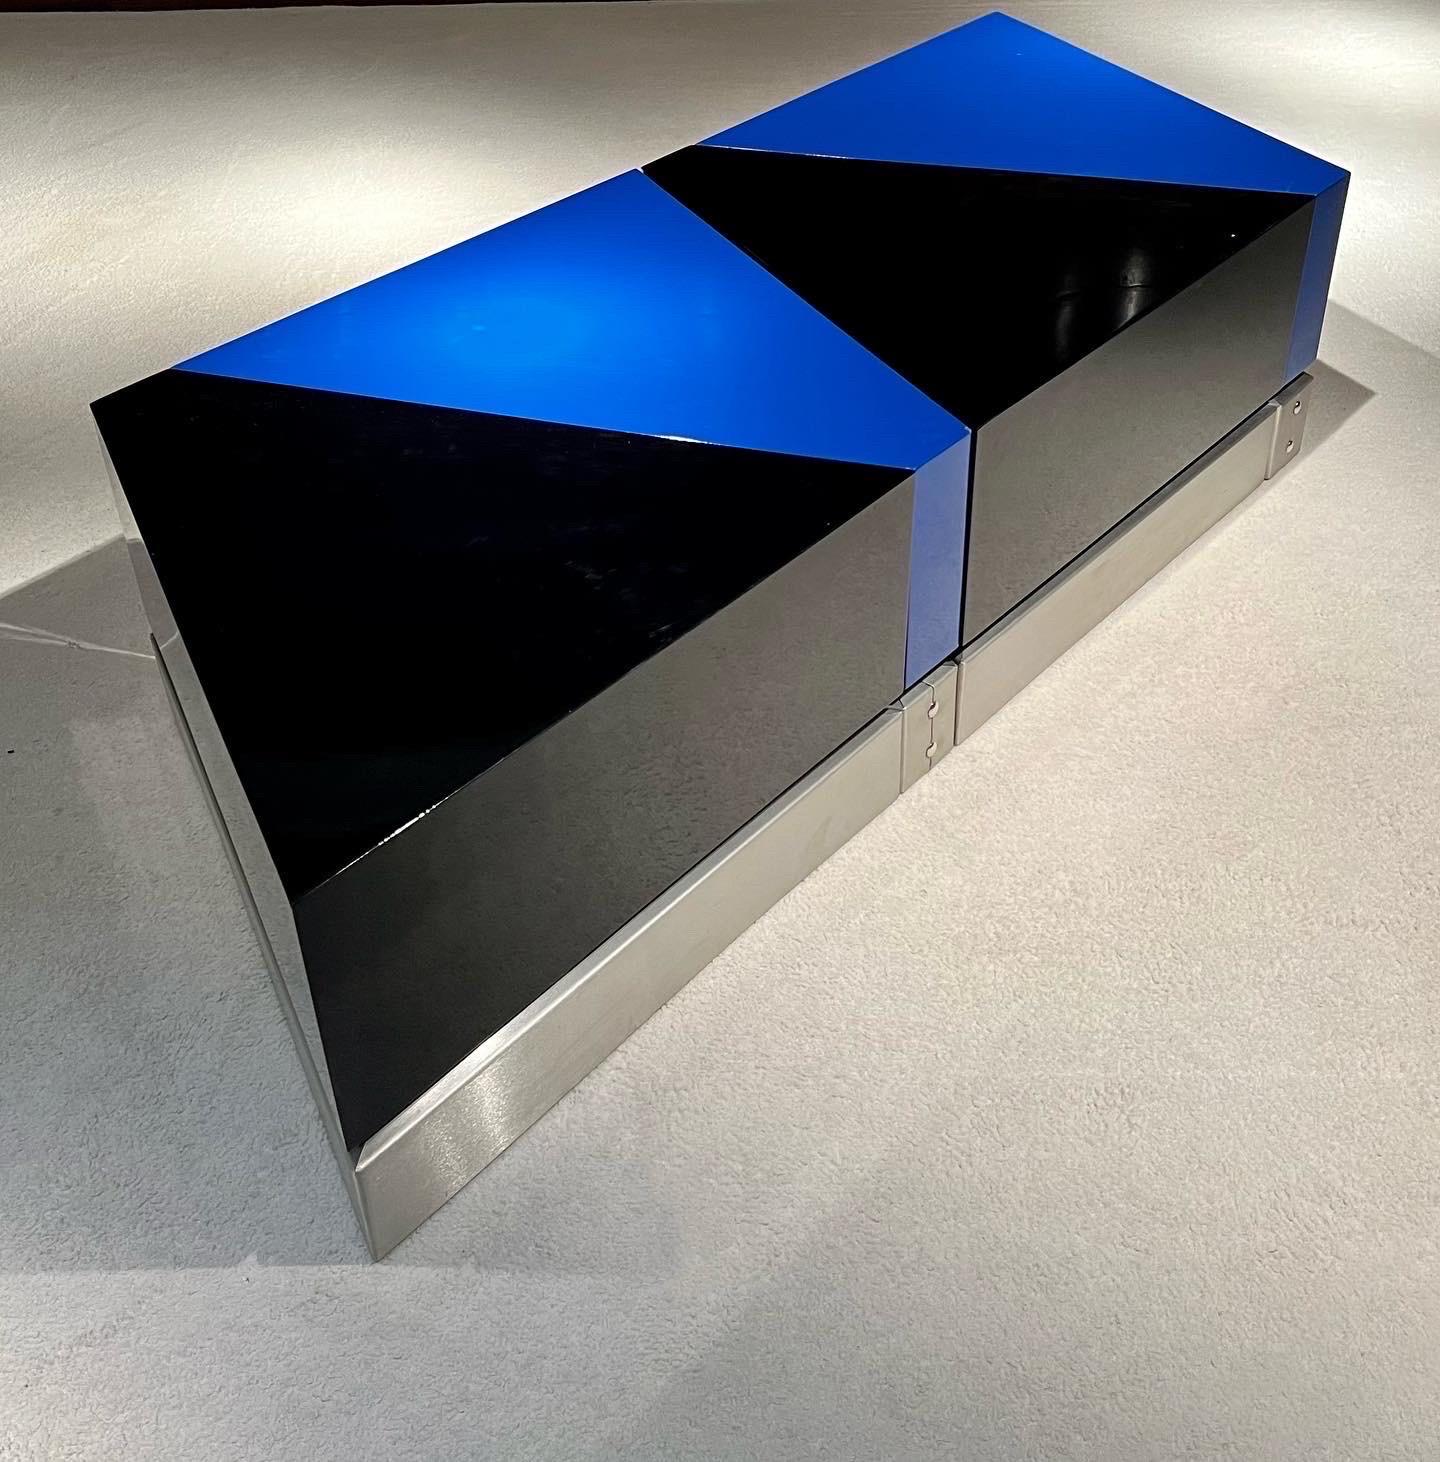 Four beautiful coffee tables created by the famous French designer Jacques Charpentier.
The tables are lacquered in black and blue with a stainless steel base.
The coffee tables can be positioned in different ways, component of coffee tables or